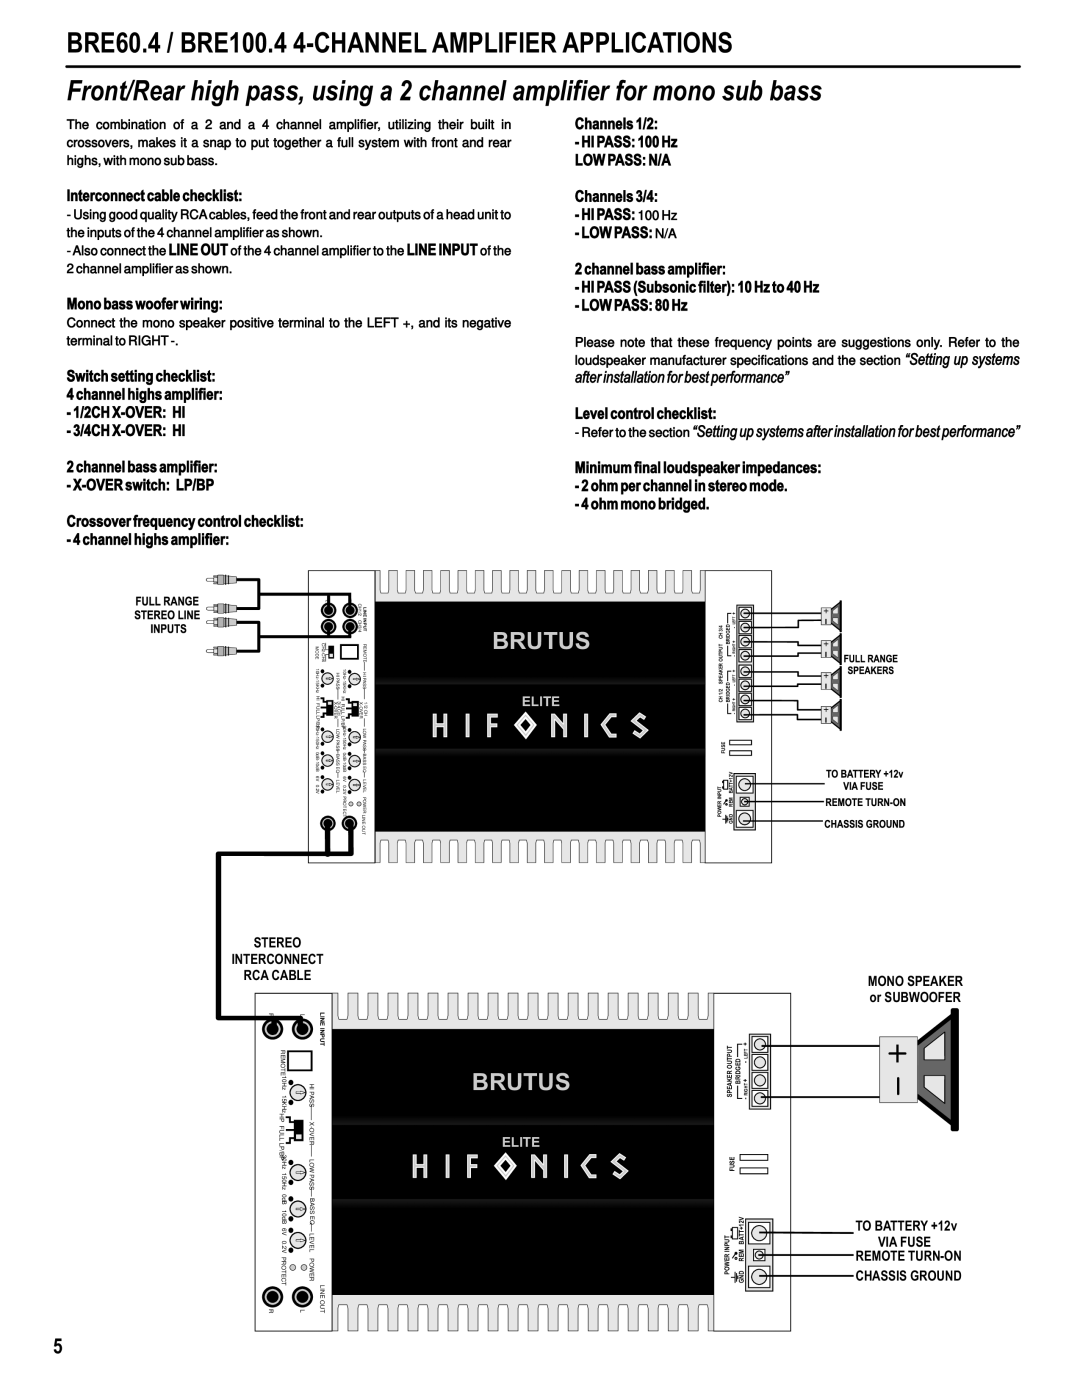 Hifionics BRE100.4 BRE1100.1D, BRE100.2, BRE1600.1D BRE2000.1D, BRE2500.1D, BRE60.4 manual Brutus, Interconnect cable checklist 